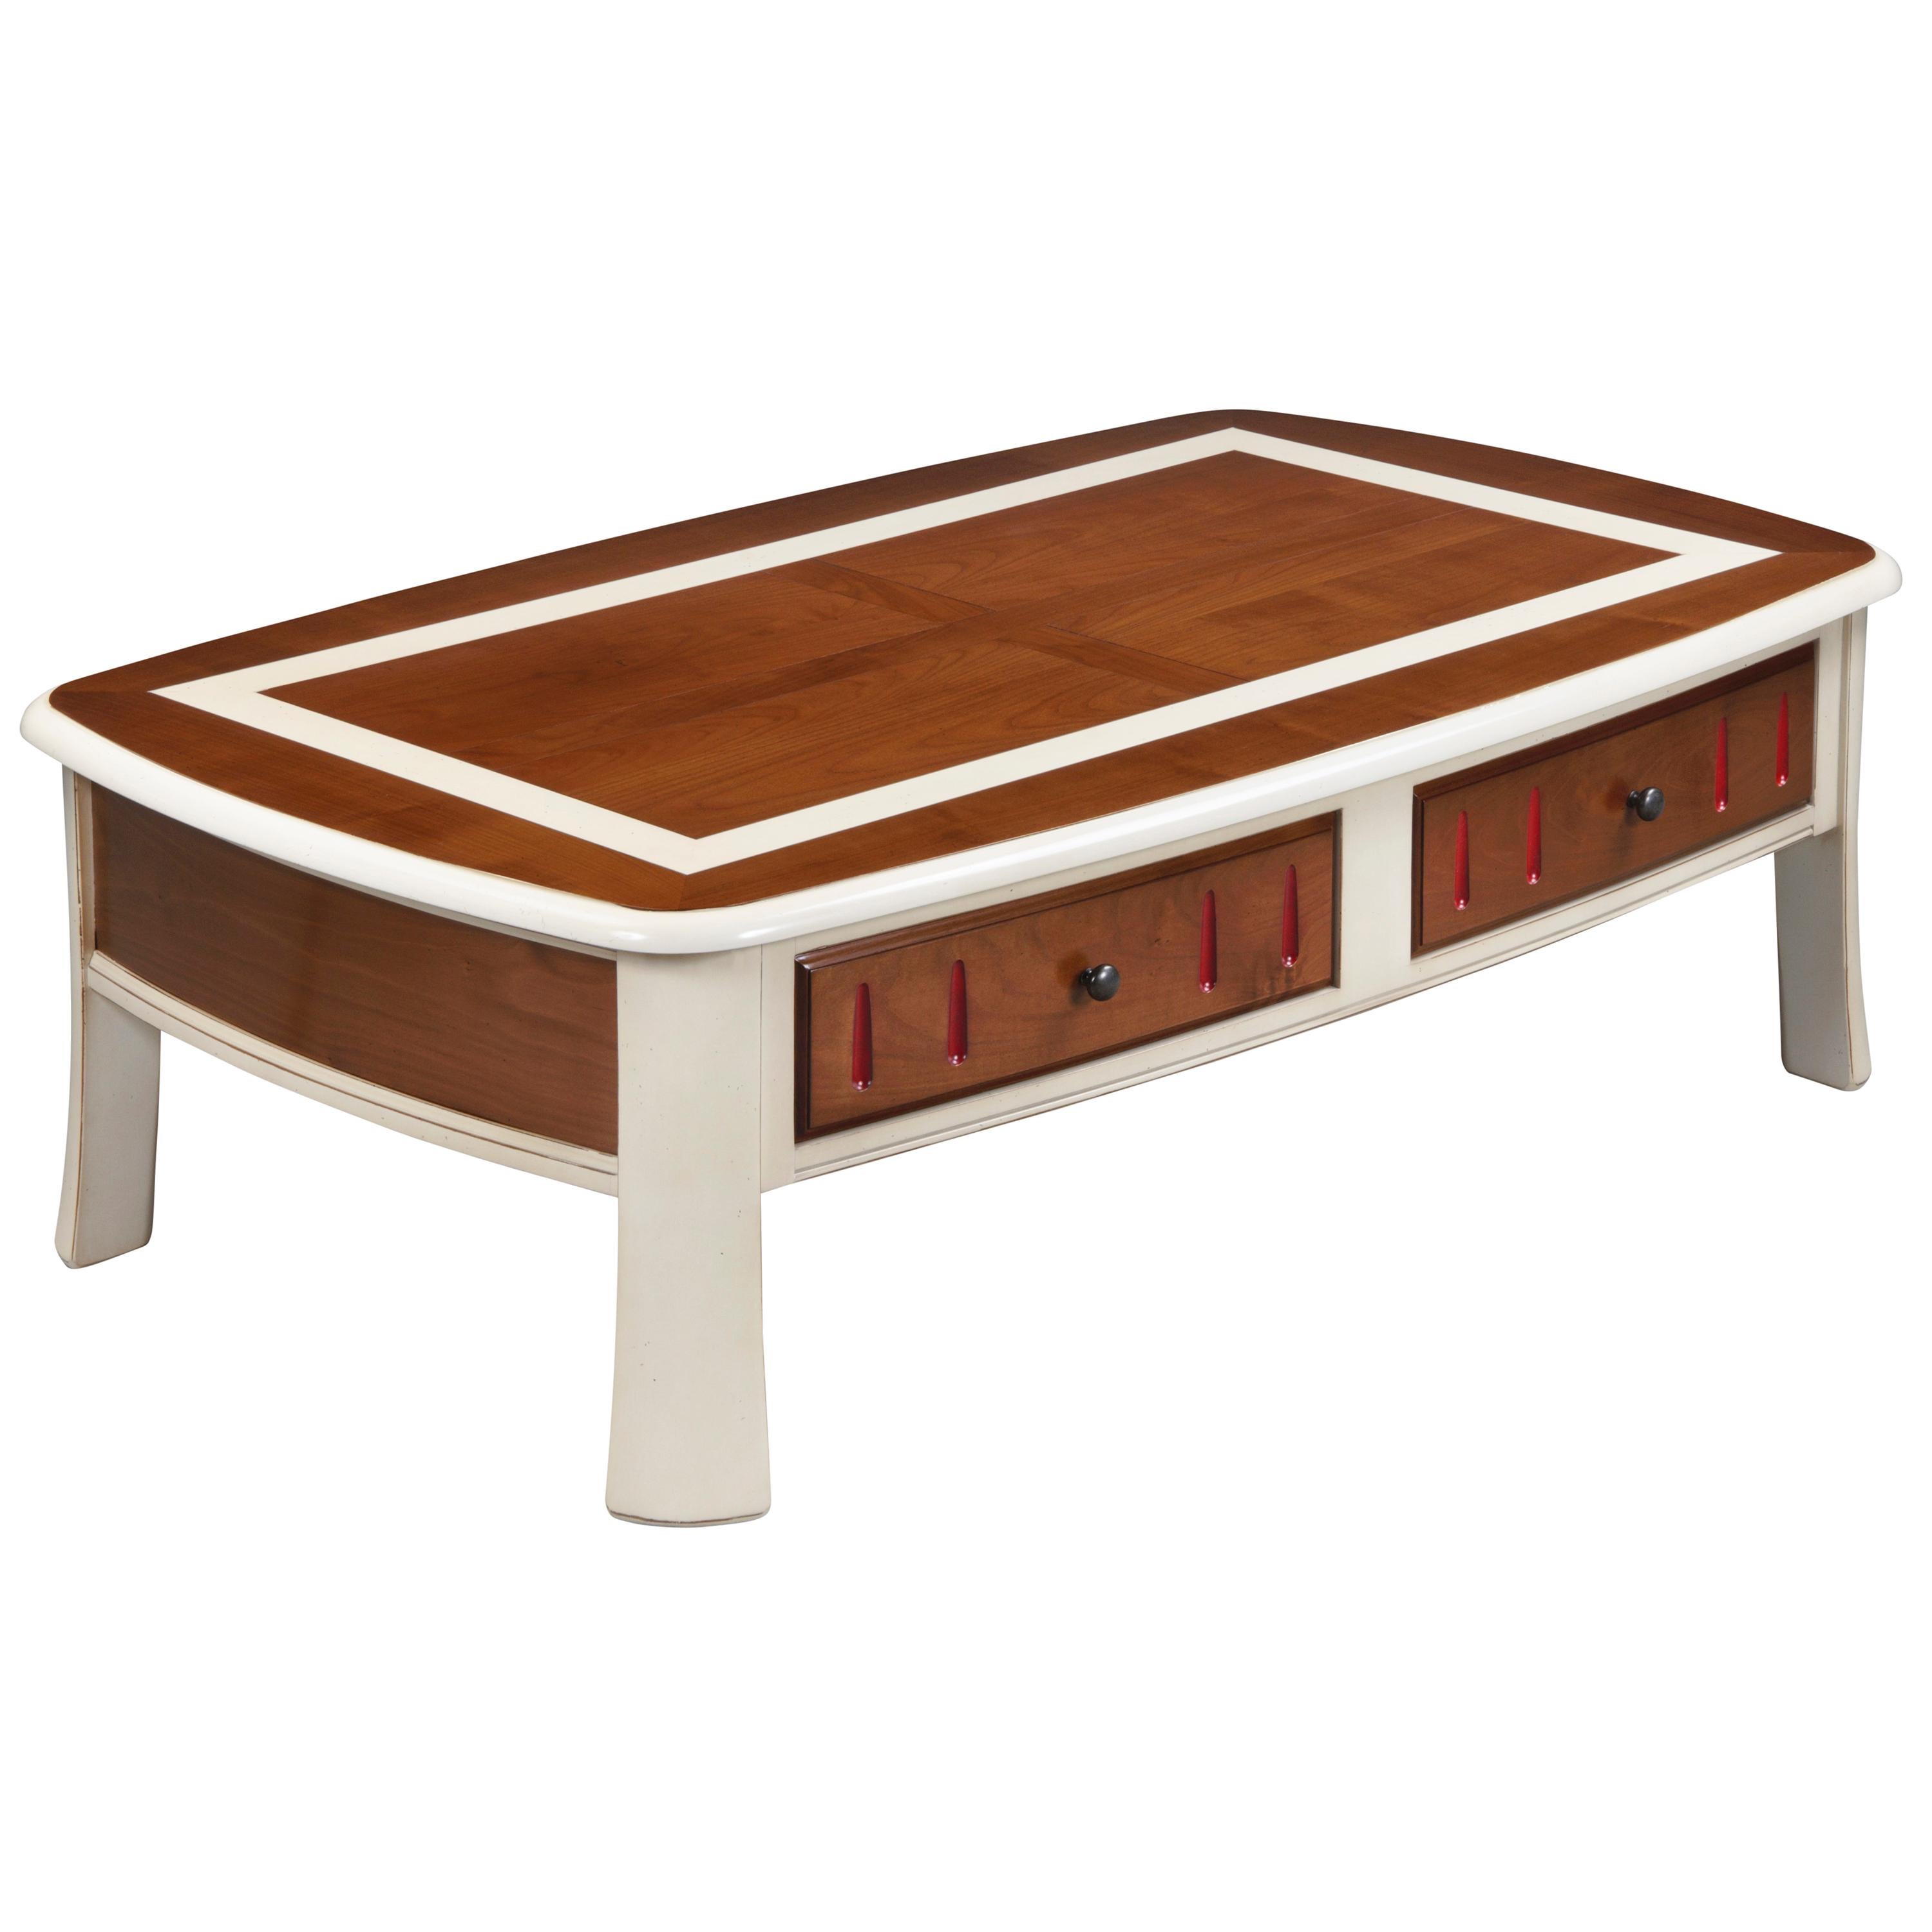 French Coffee Table Tradition in Cherry Wood with 2 Drawers, 100% Made in France For Sale